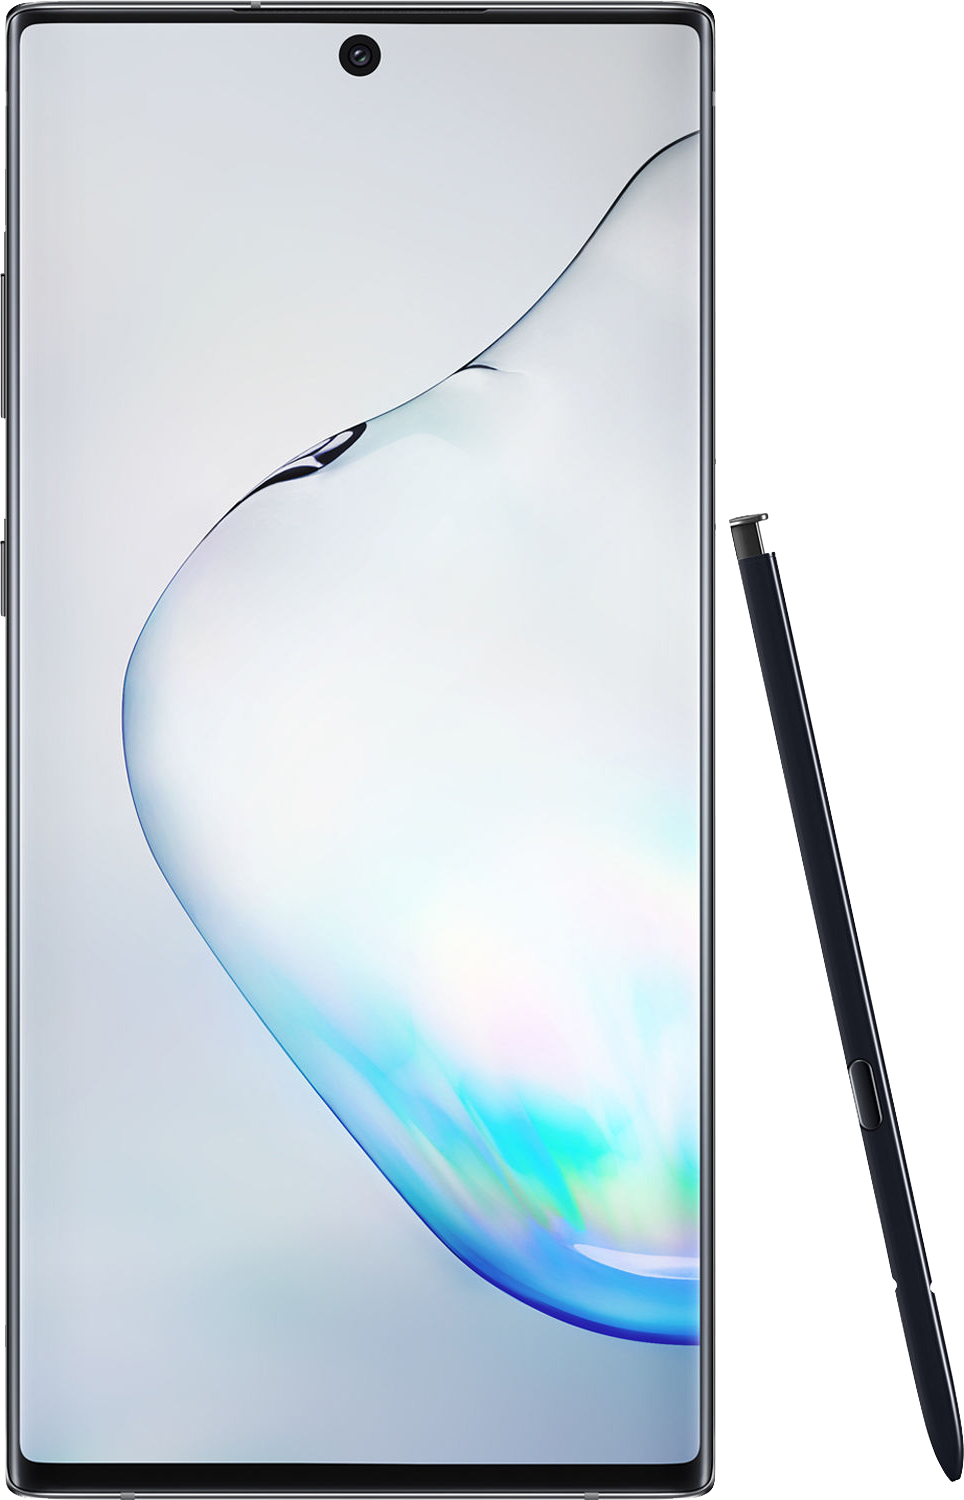 https://www.androidcentral.com/sites/androidcentral.com/files/styles/small/public/article_images/2019/11/galaxy-note-10-plus-front-render.png?itok=ma2Wym9u